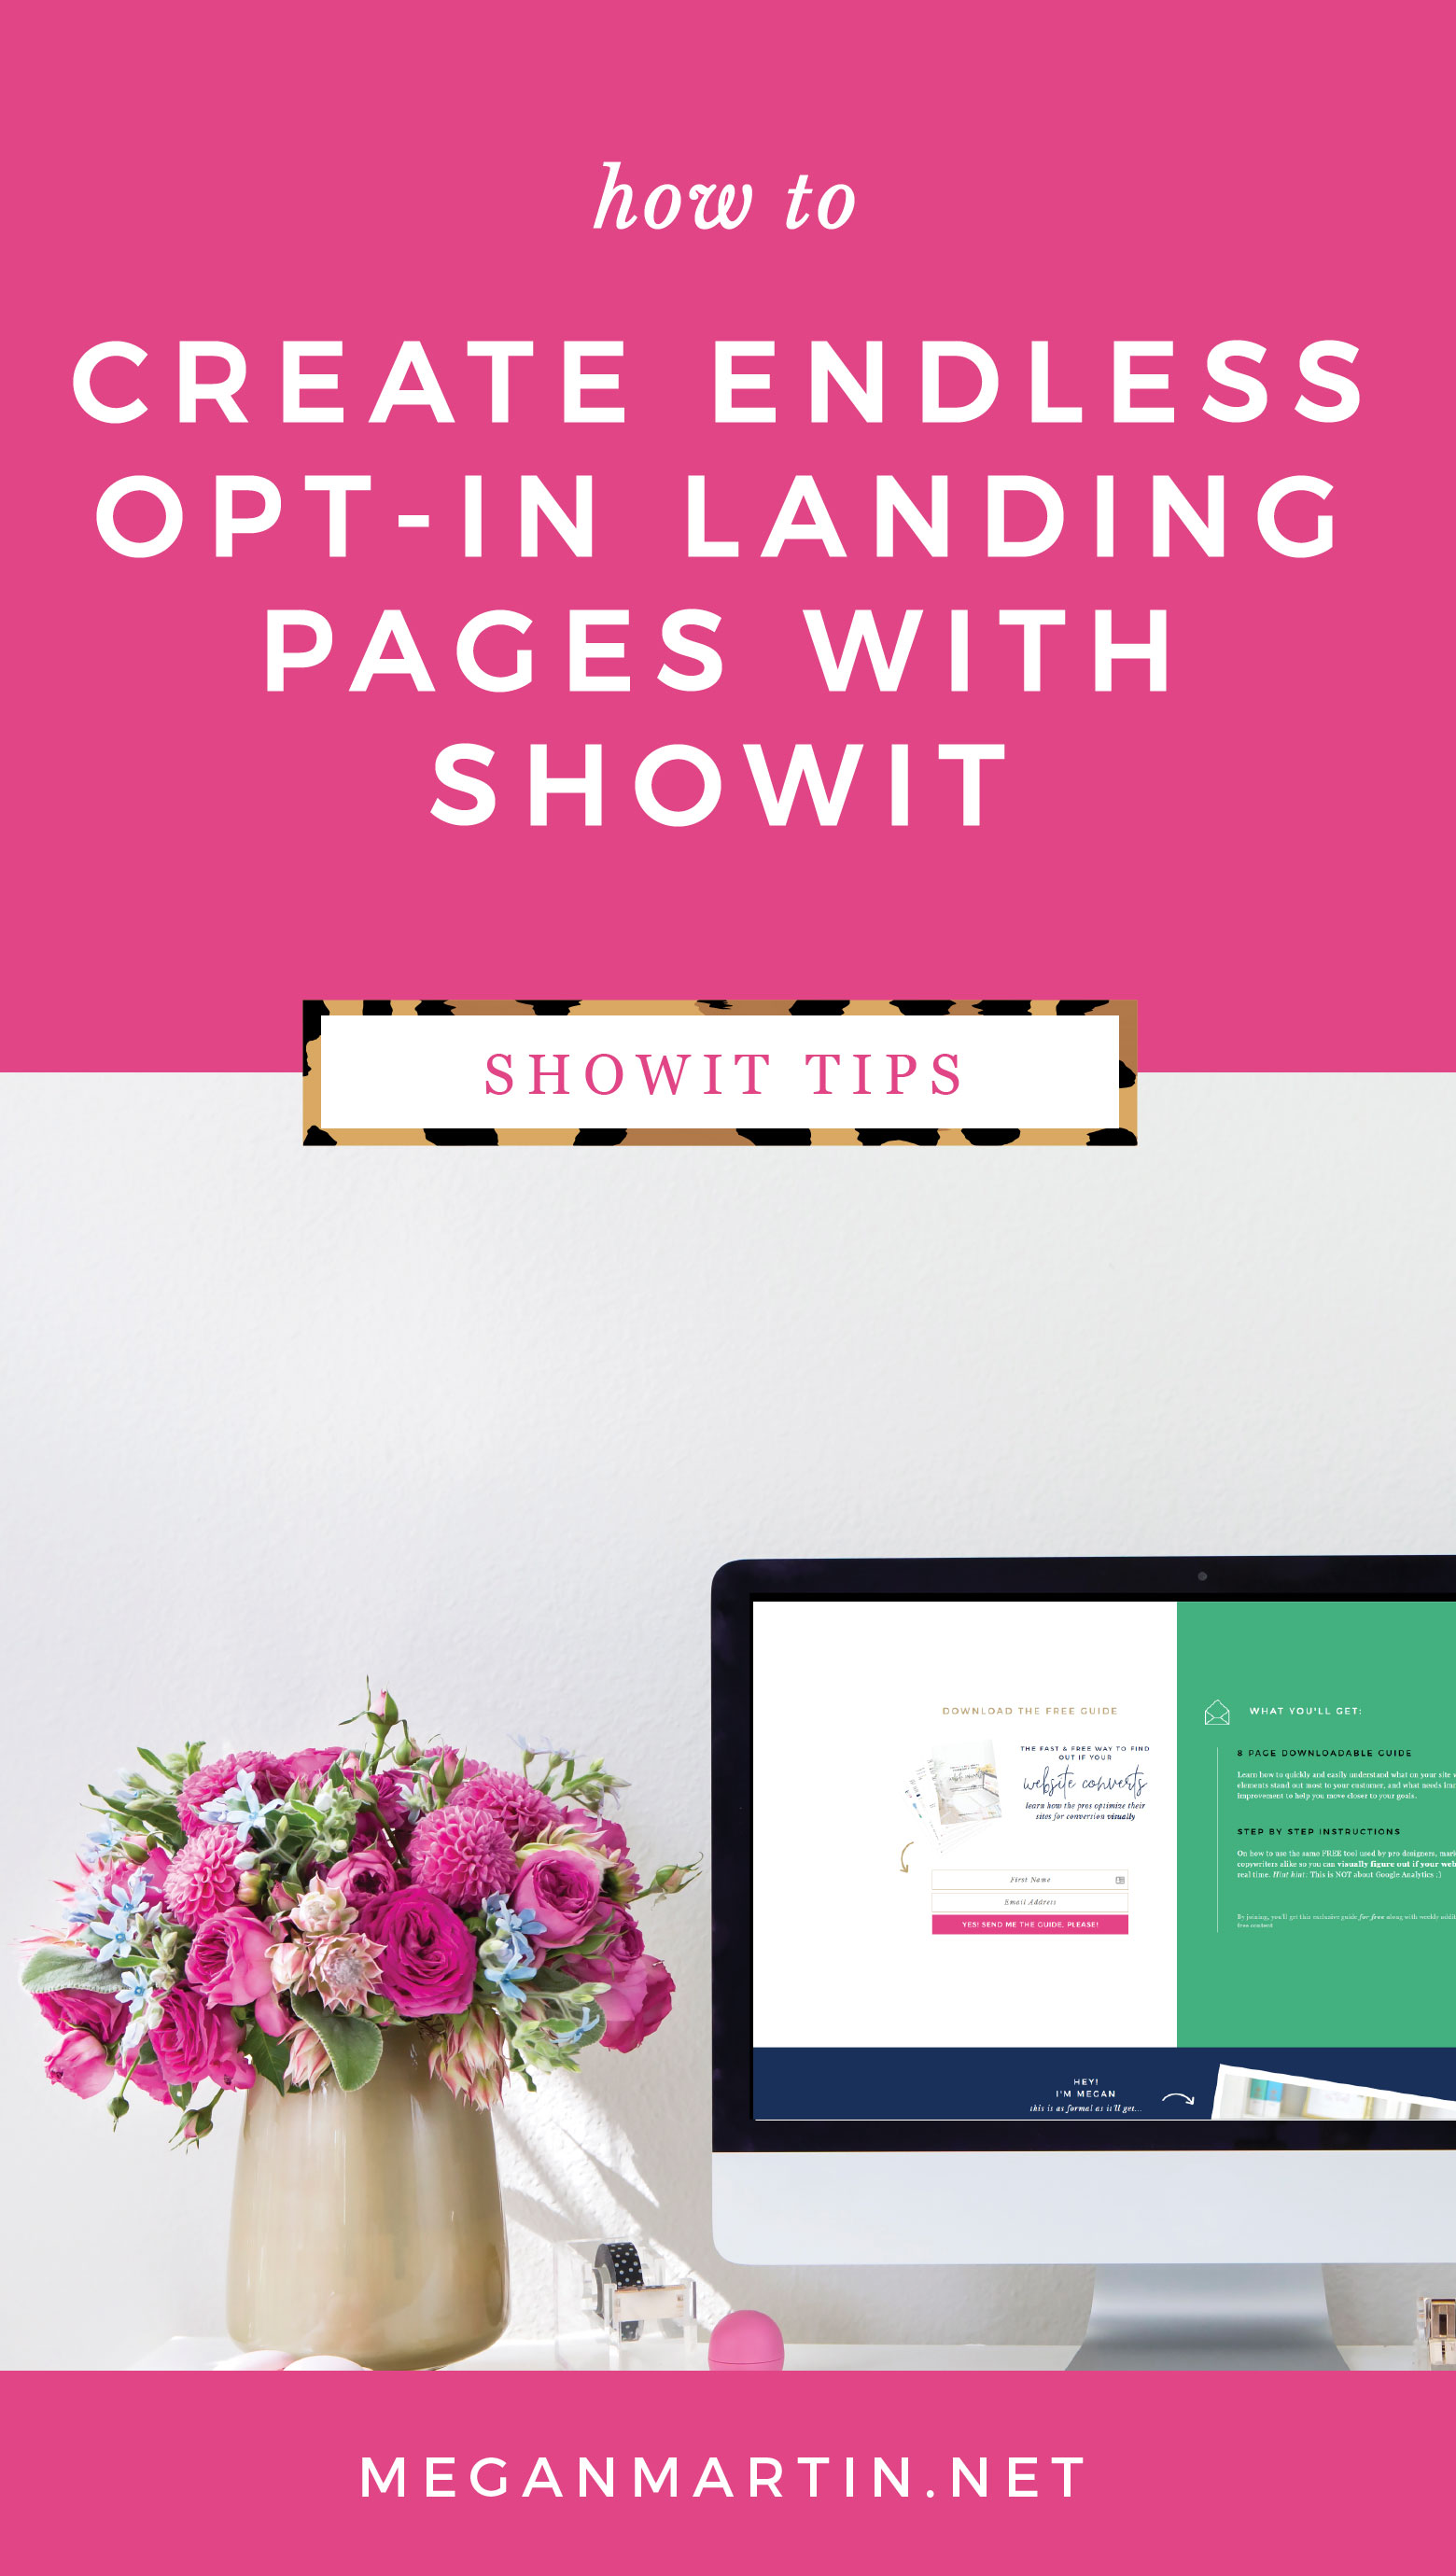 how to create endless opt-in landing pages with showit - video tutorial